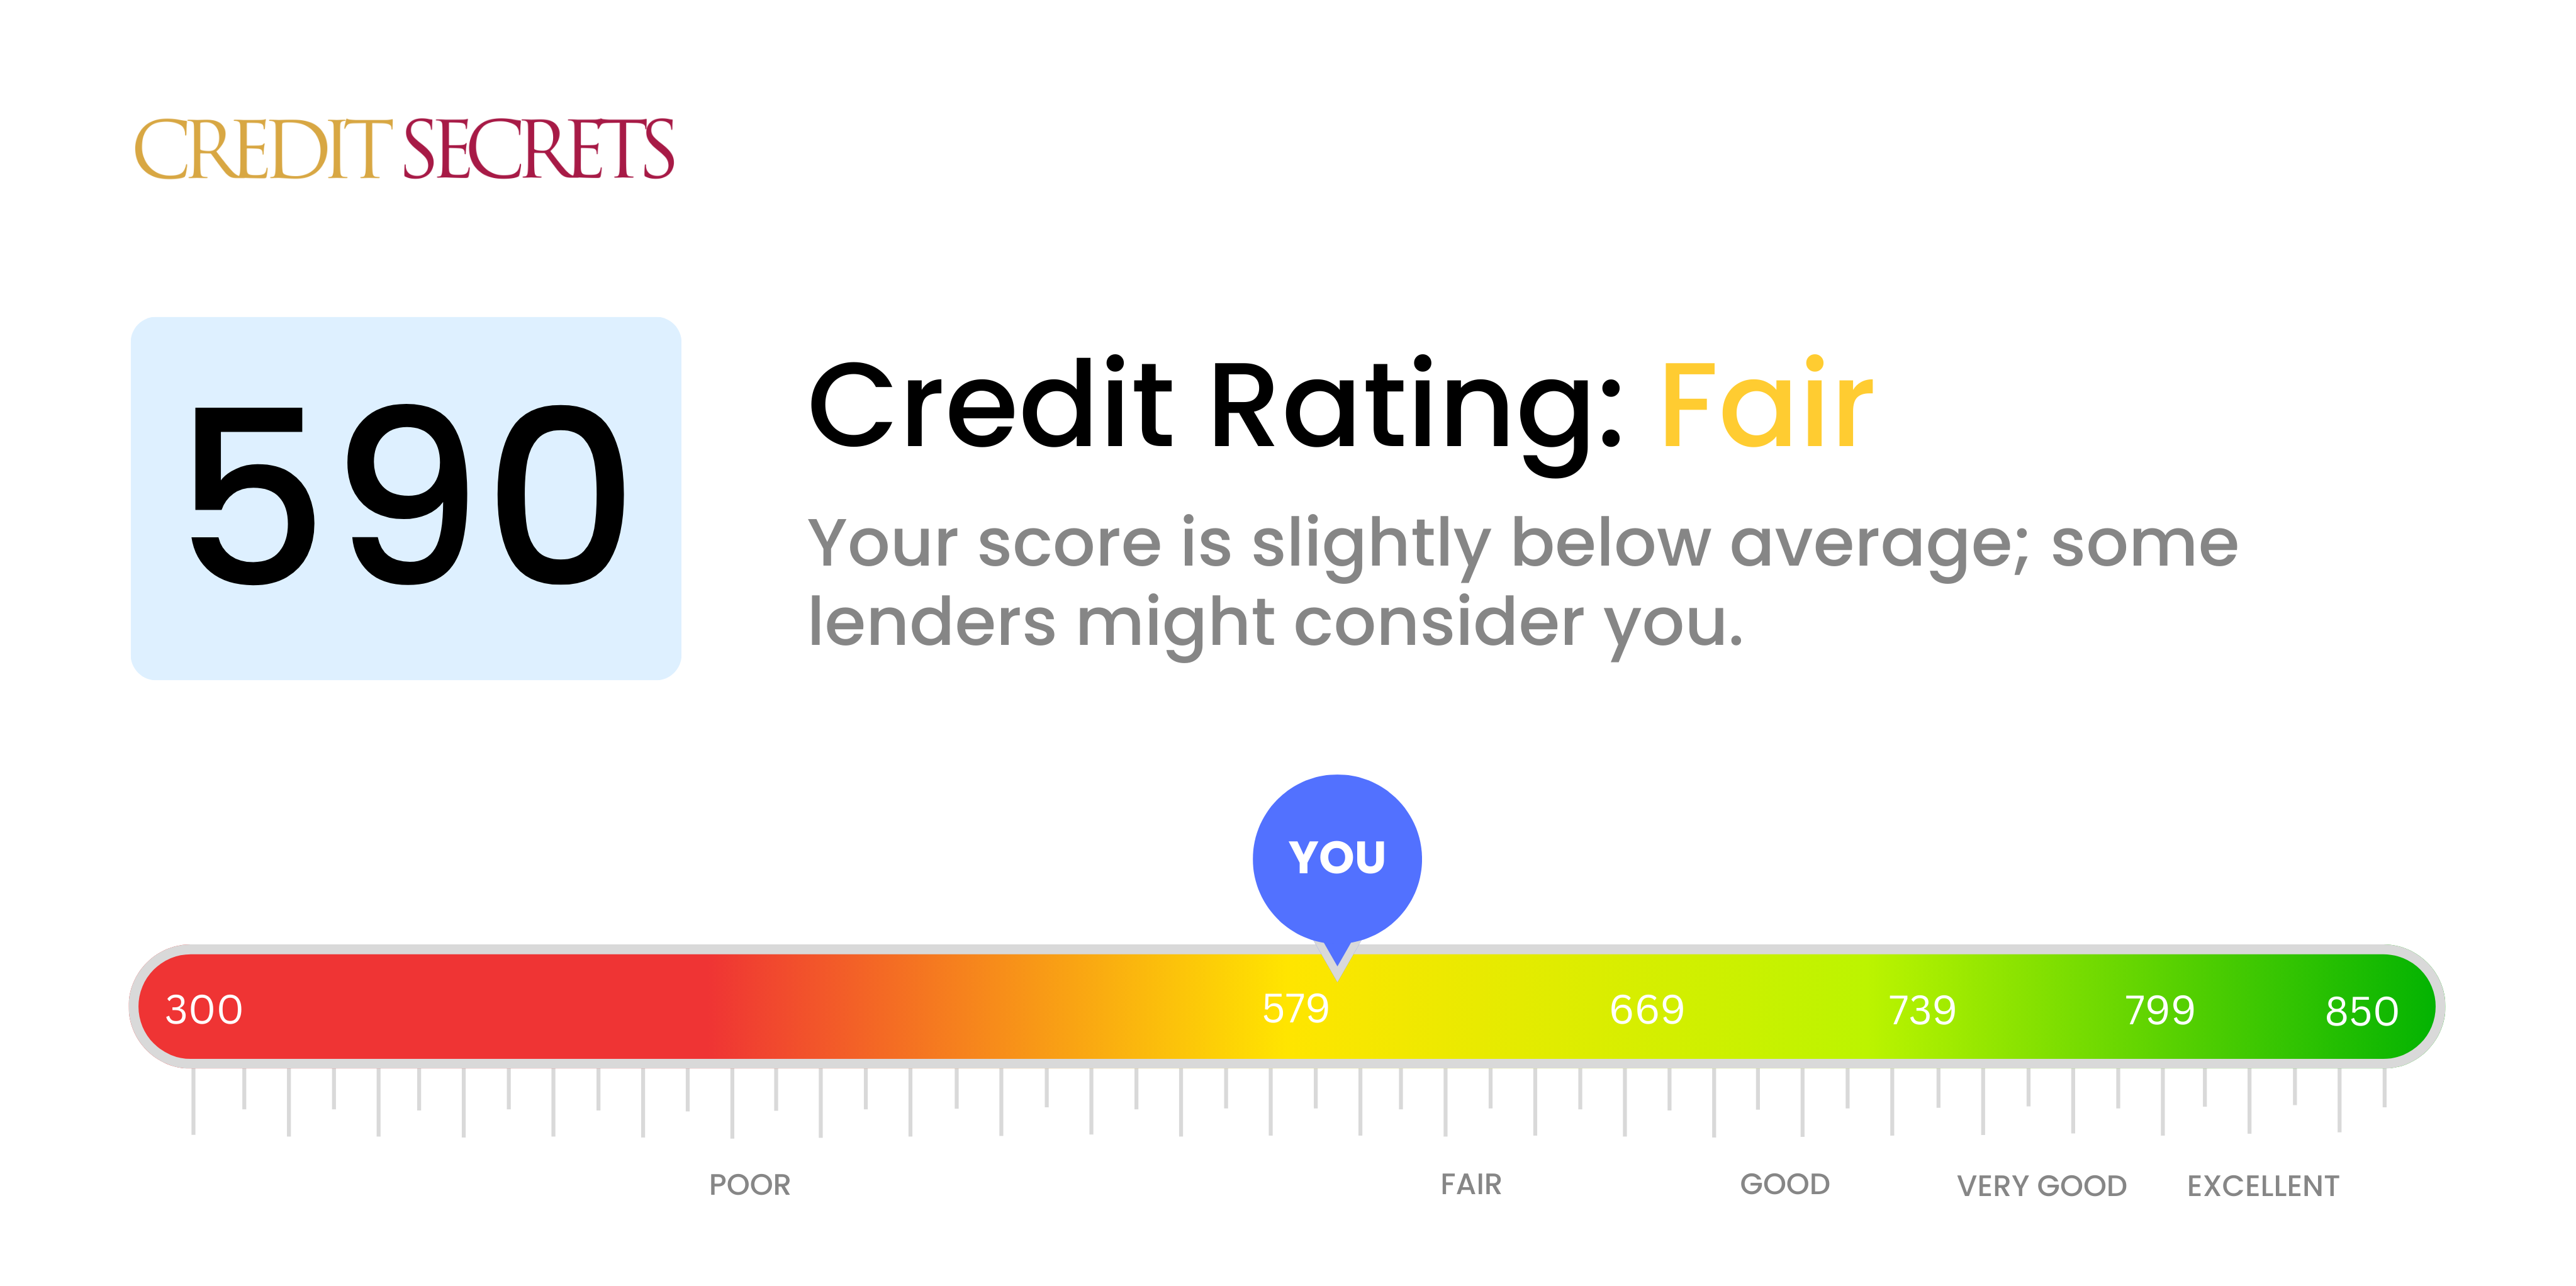 Is 590 a good credit score?